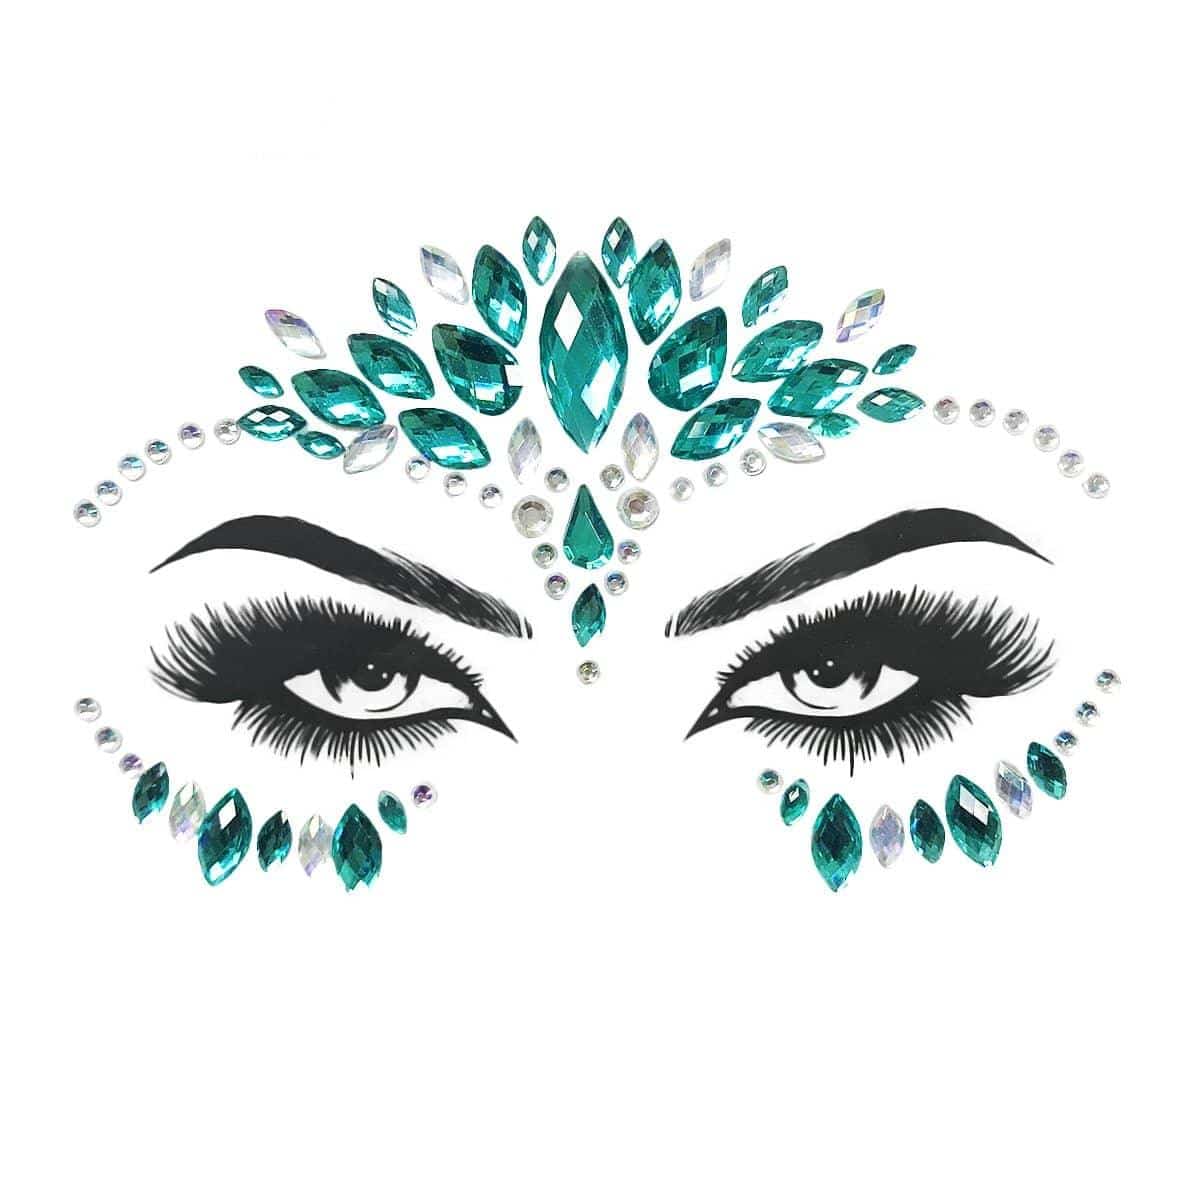 Buy Costume Accessories Turquoise & iridescent face art crystal stickers sold at Party Expert